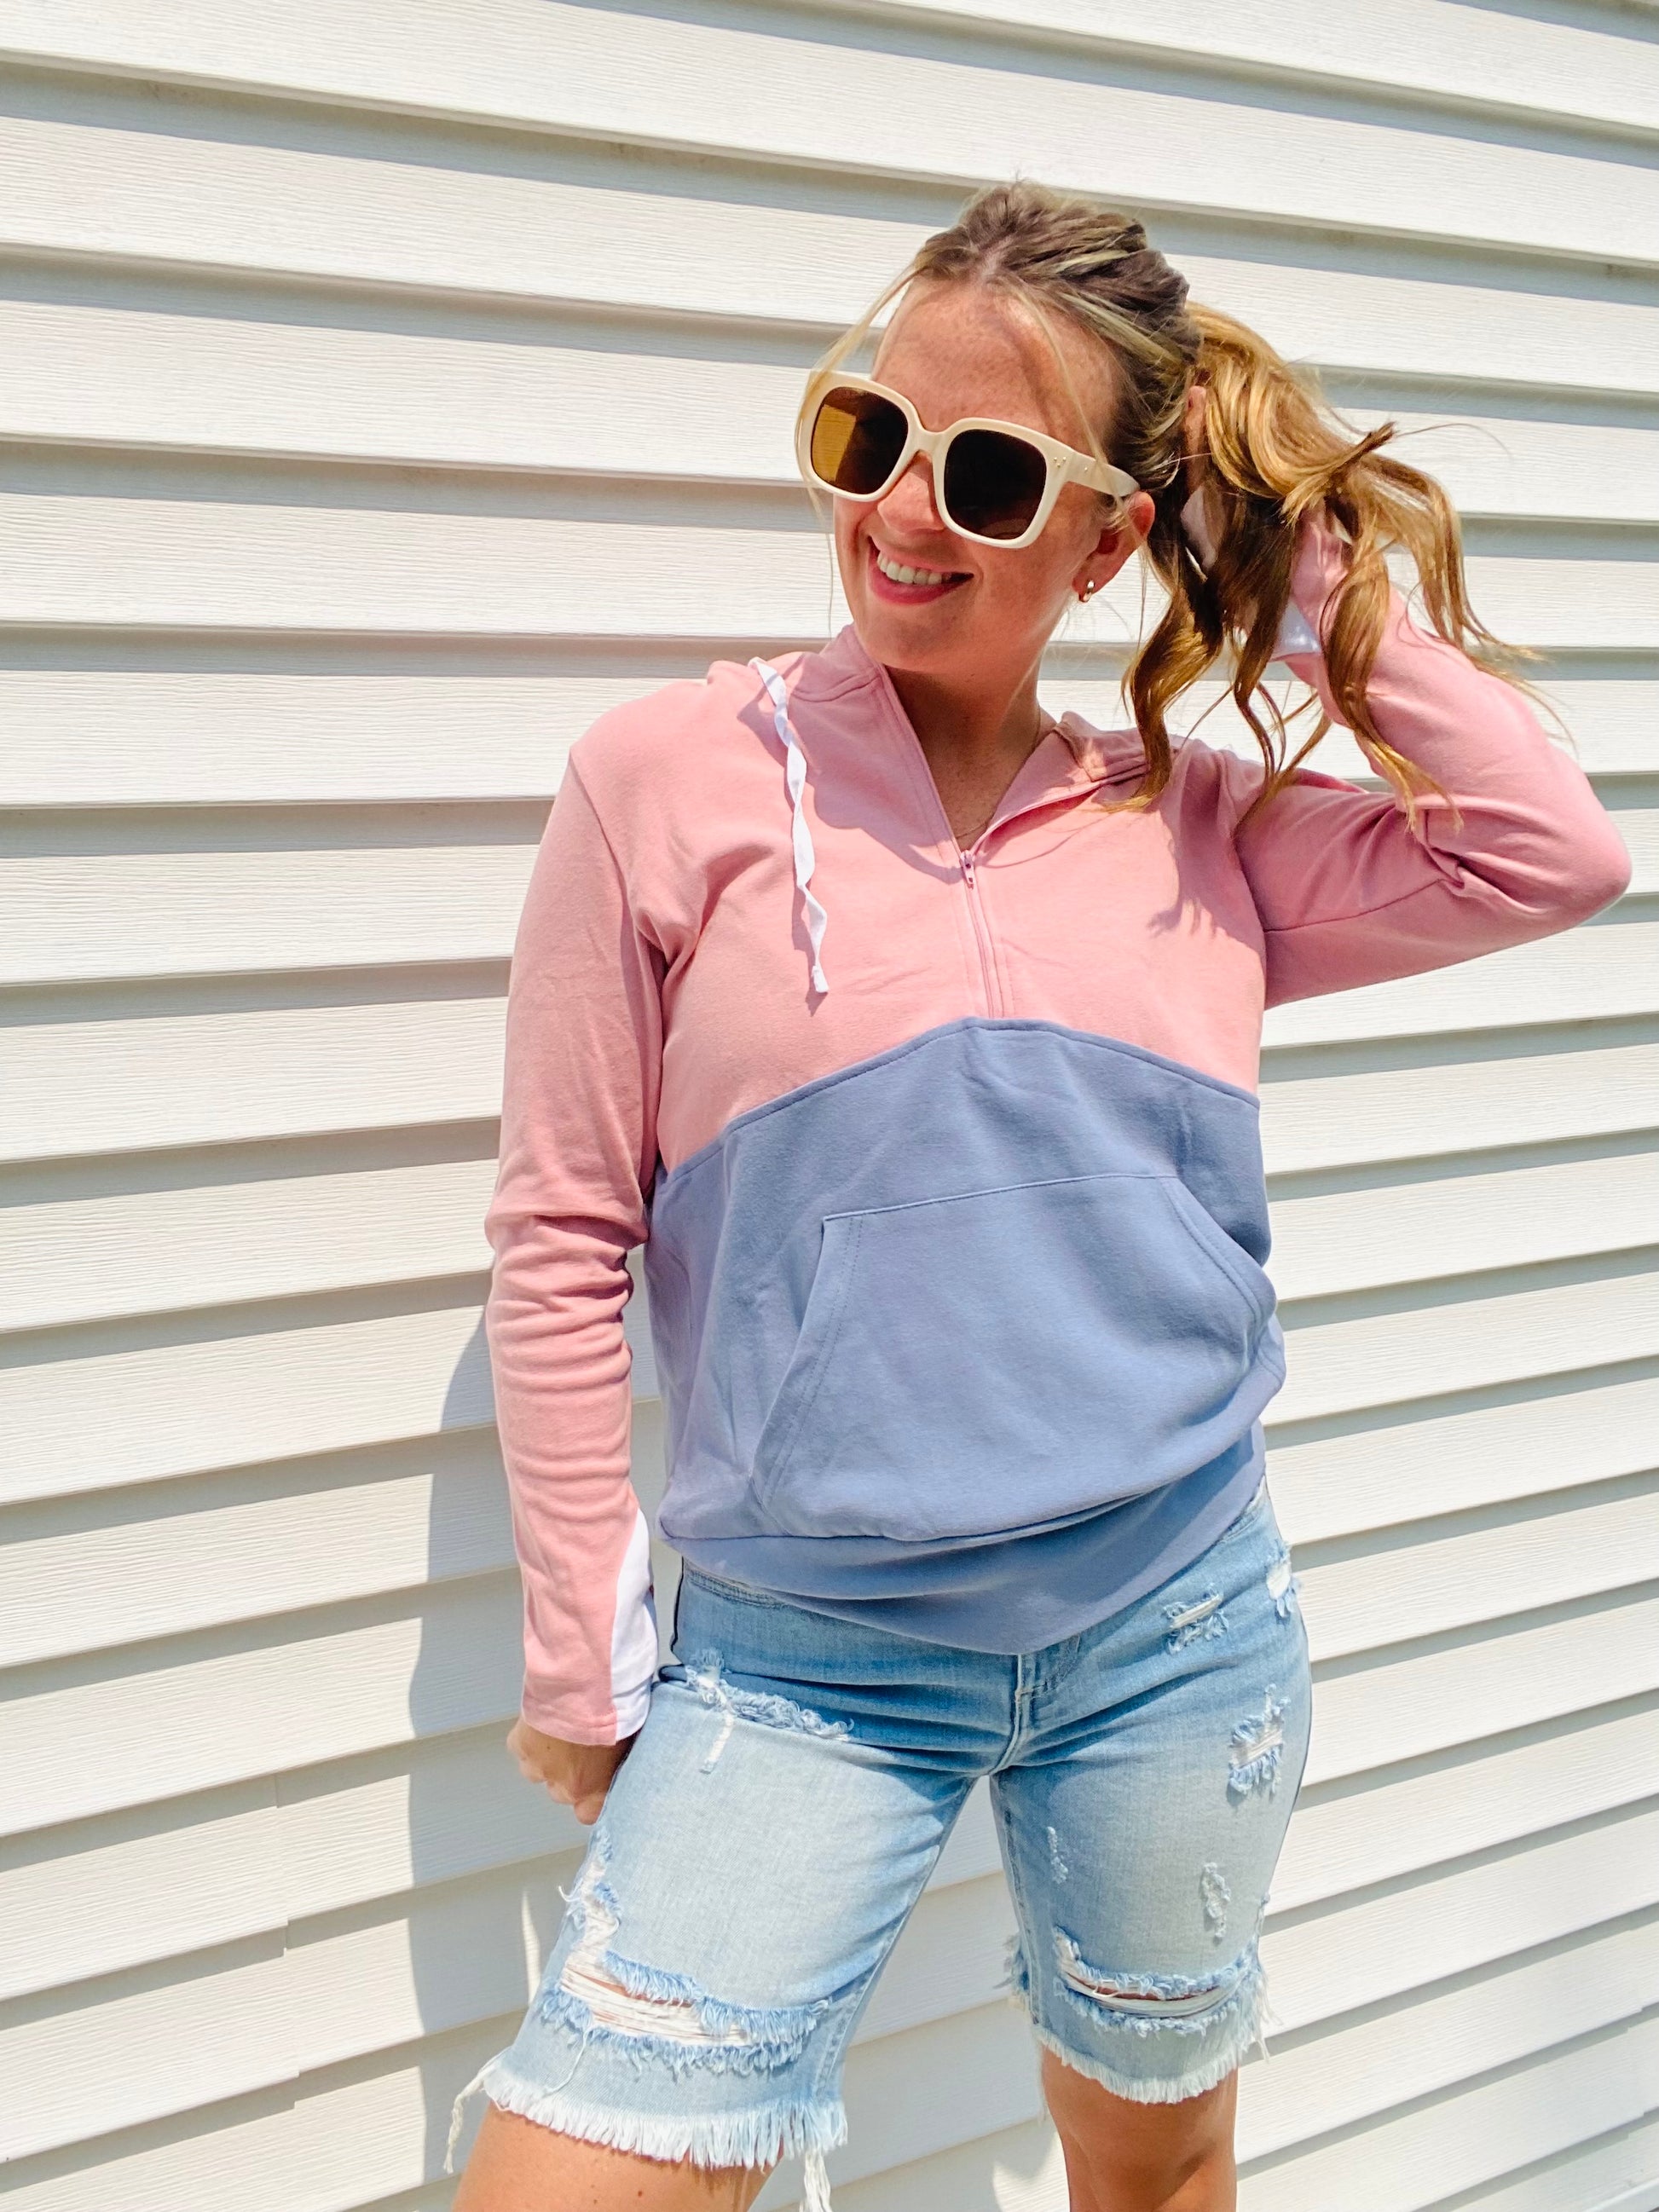 Stay warm and stylish with the Pink and Blue Block Zip Hoodie. Crafted with comfortable materials, this hoodie features contrasting colors, a half zipper, white cuff accents, and an oversized hood. Perfect for chilly days and nights - stay cozy in style!